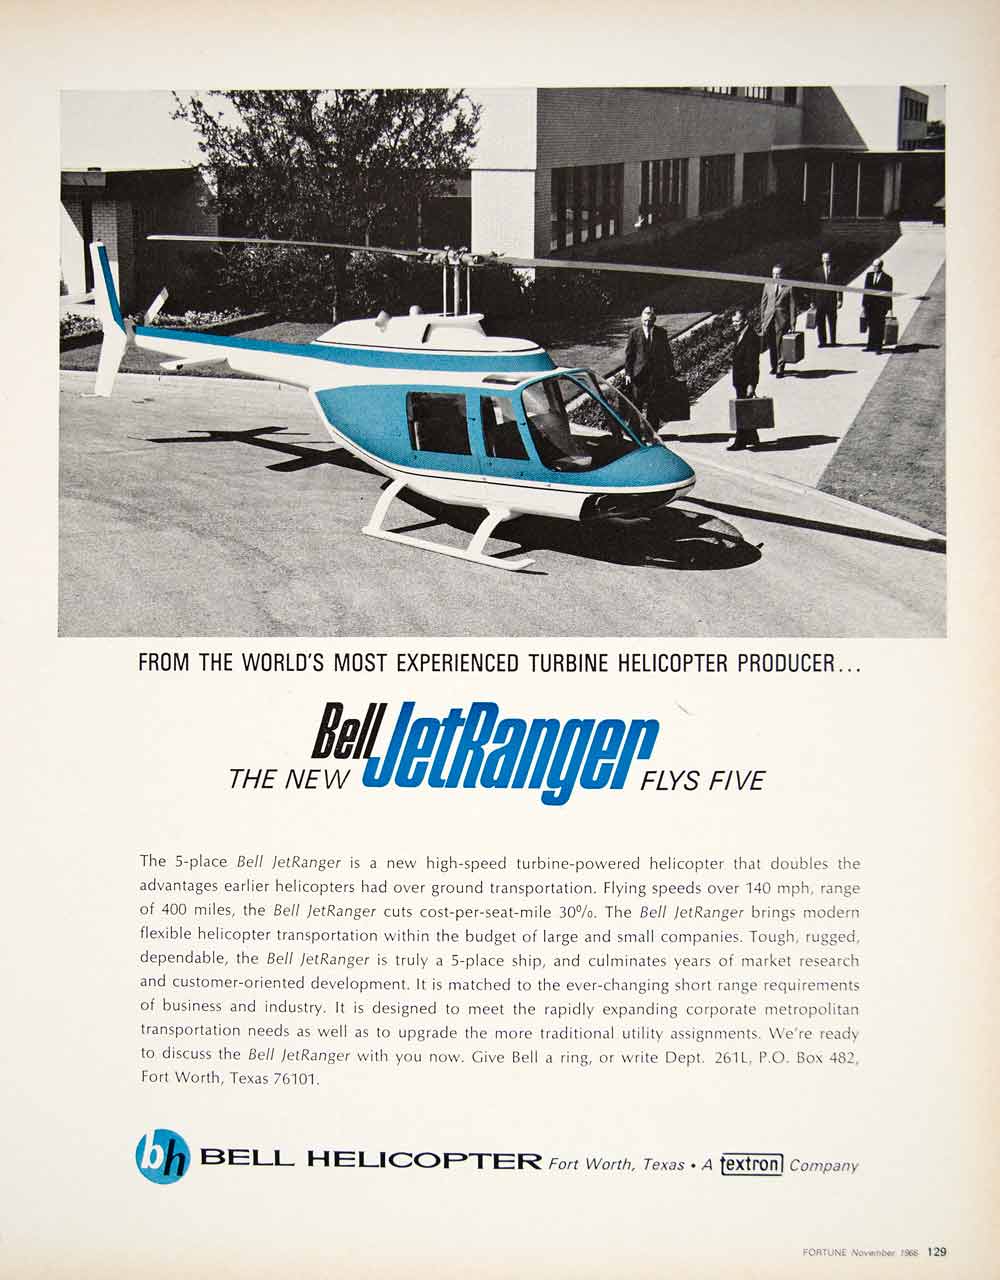 1966 Ad Vintage Bell JetRanger Helicopter Turbine Powered Business Aircraft YFM3